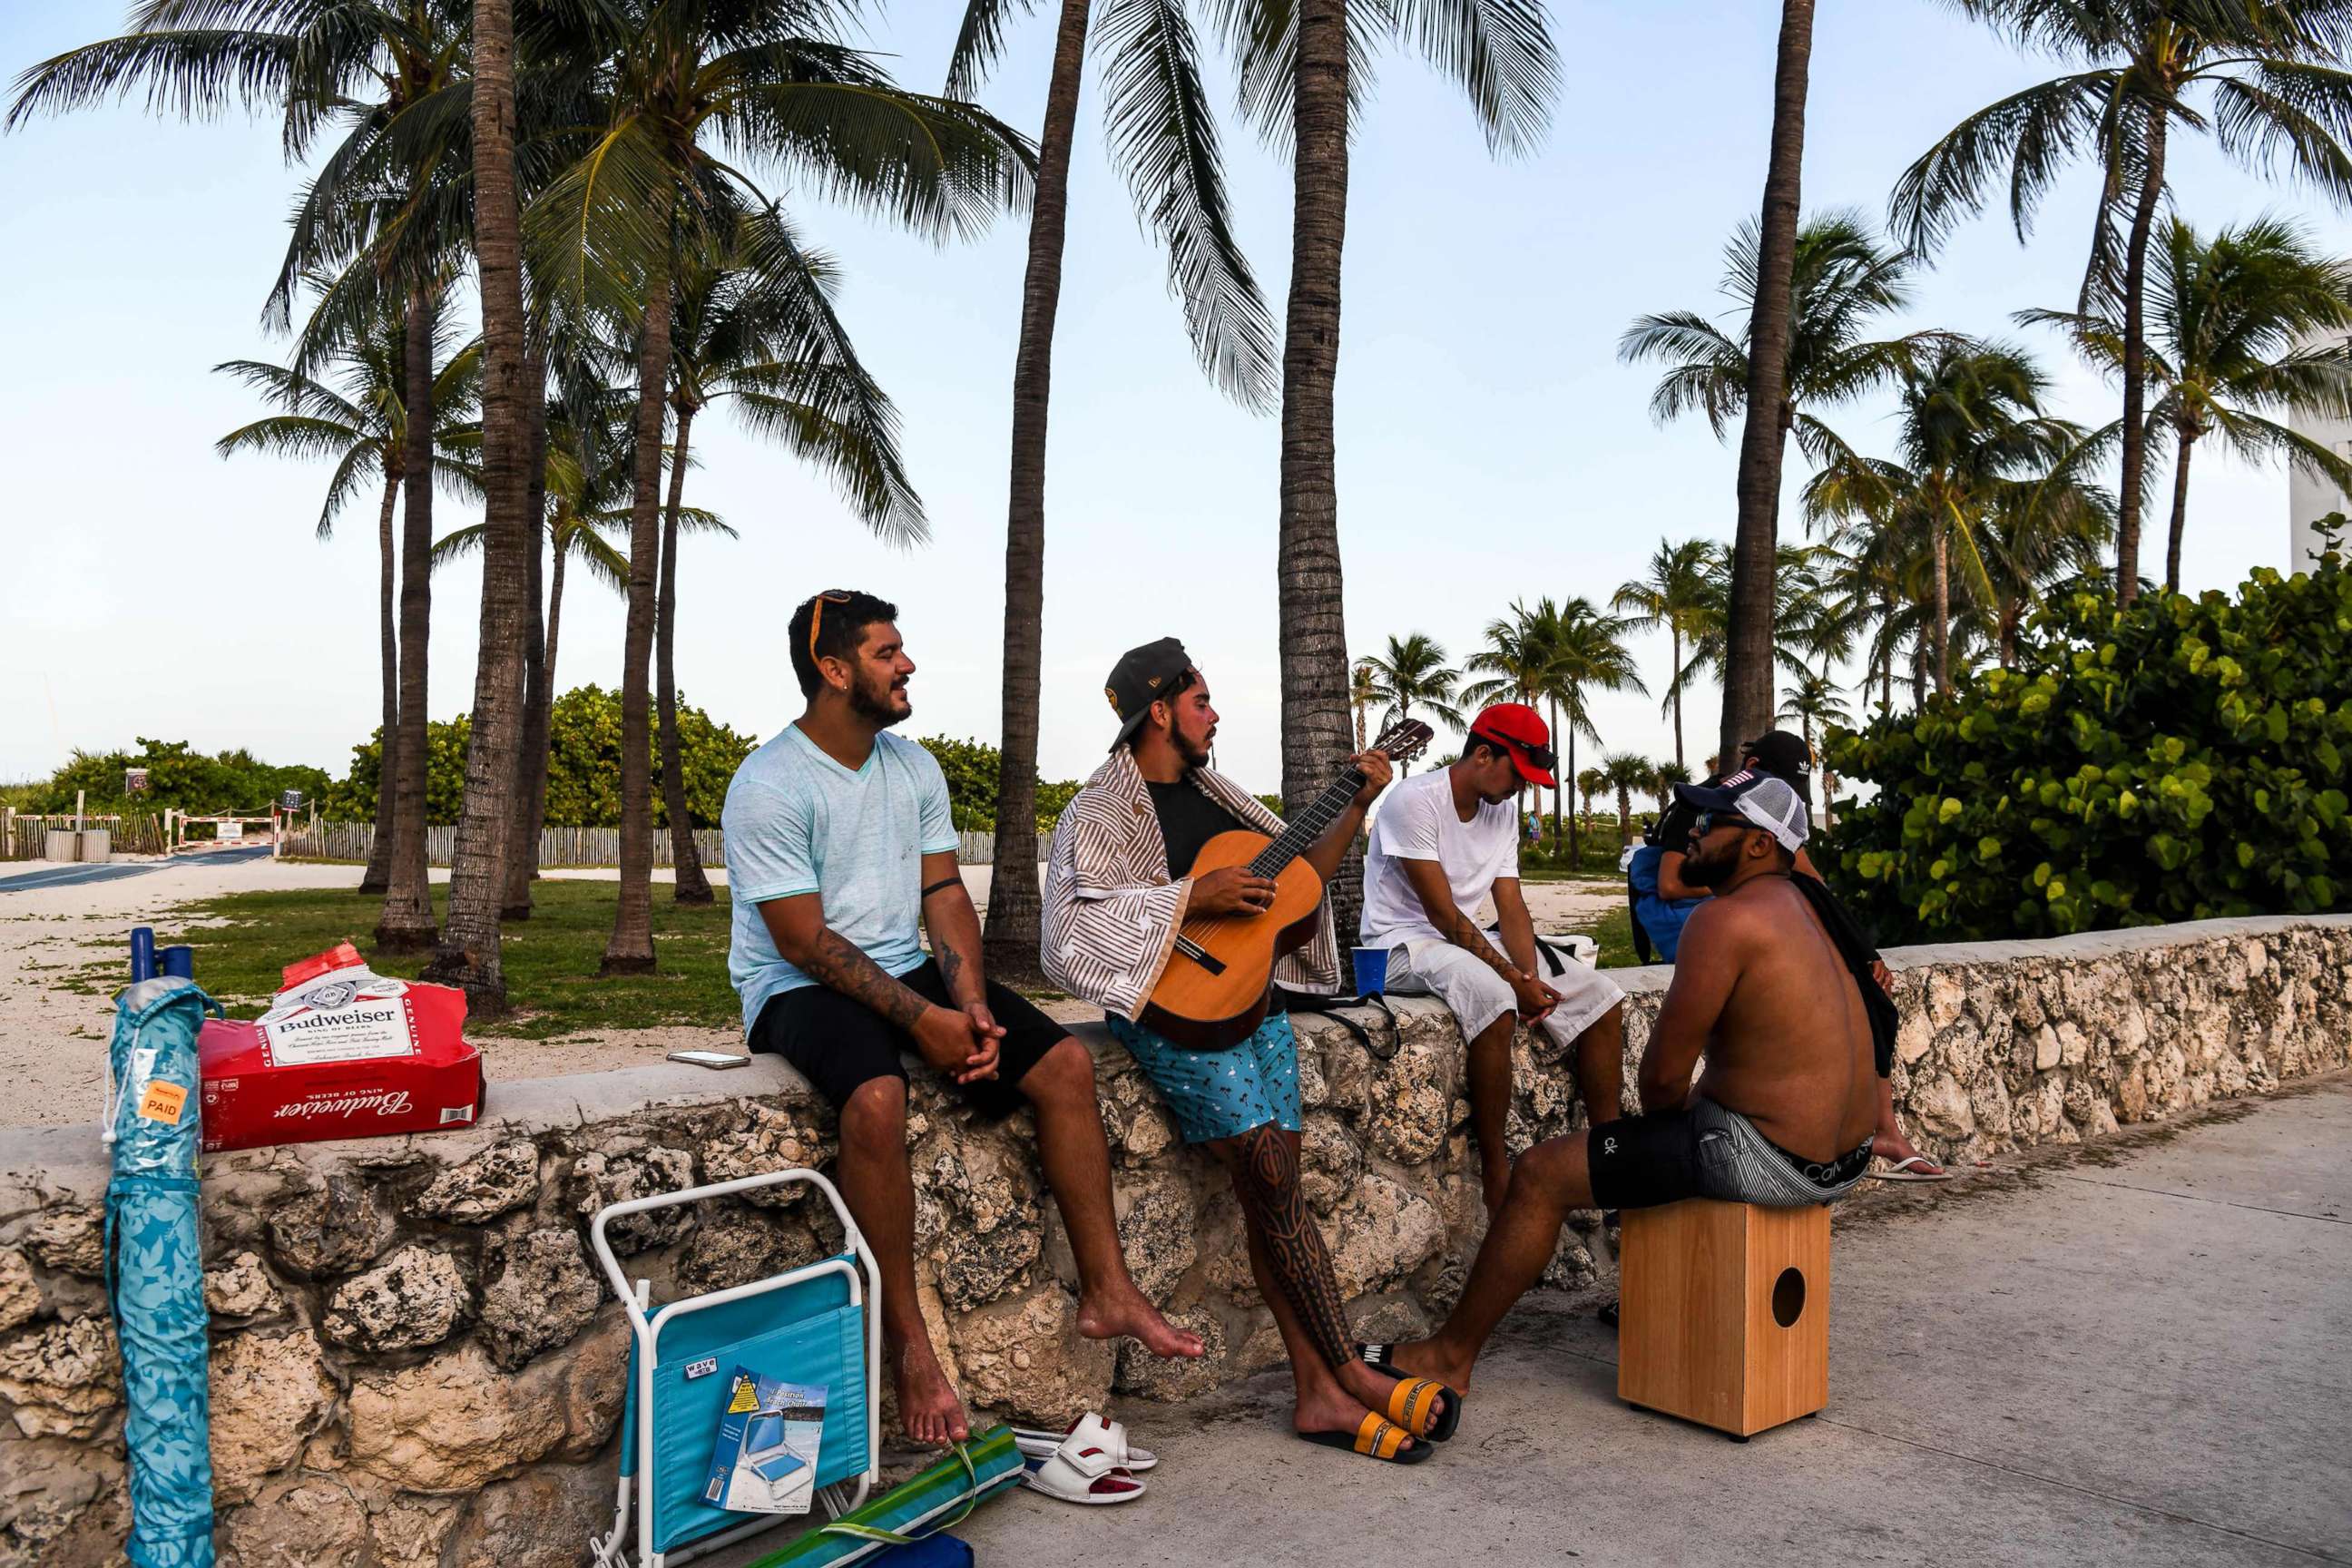 PHOTO: A group of men play music on the beach in Miami Beach, Fla., on July 28, 2020, amid the coronavirus pandemic.